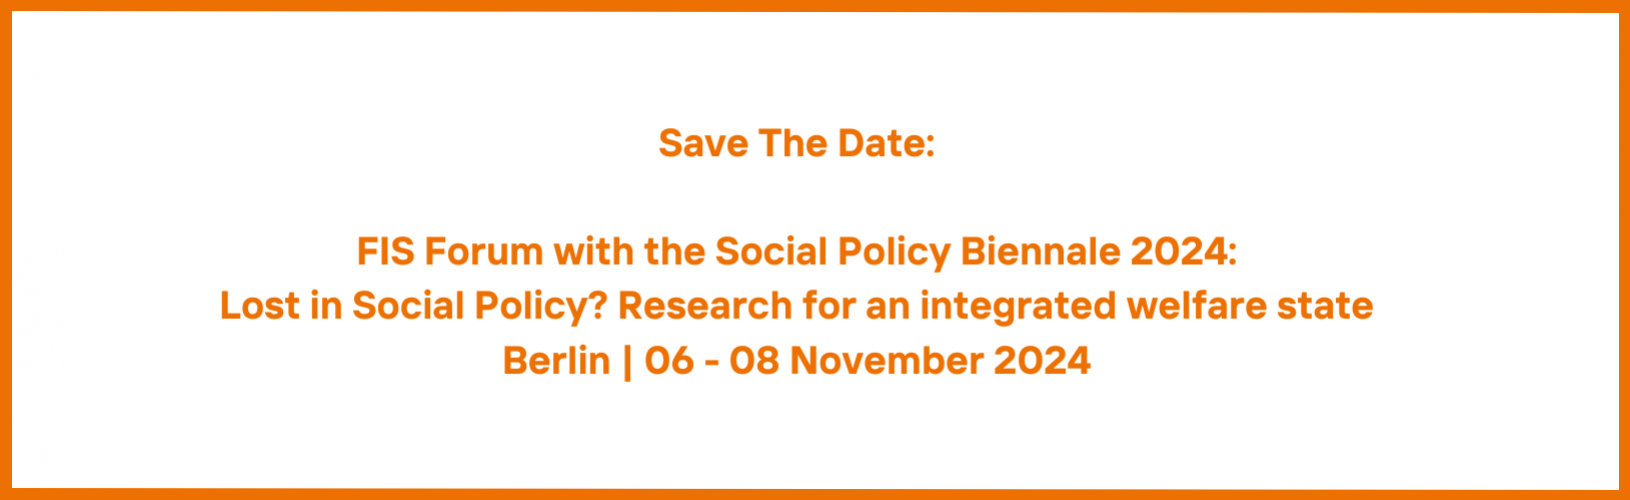 "Save The Date: FIS Forum with the Social Policy Biennale 2024: Lost in Social Policy? Research for an integrated welfare state, Berlin 6-8 November 2024"